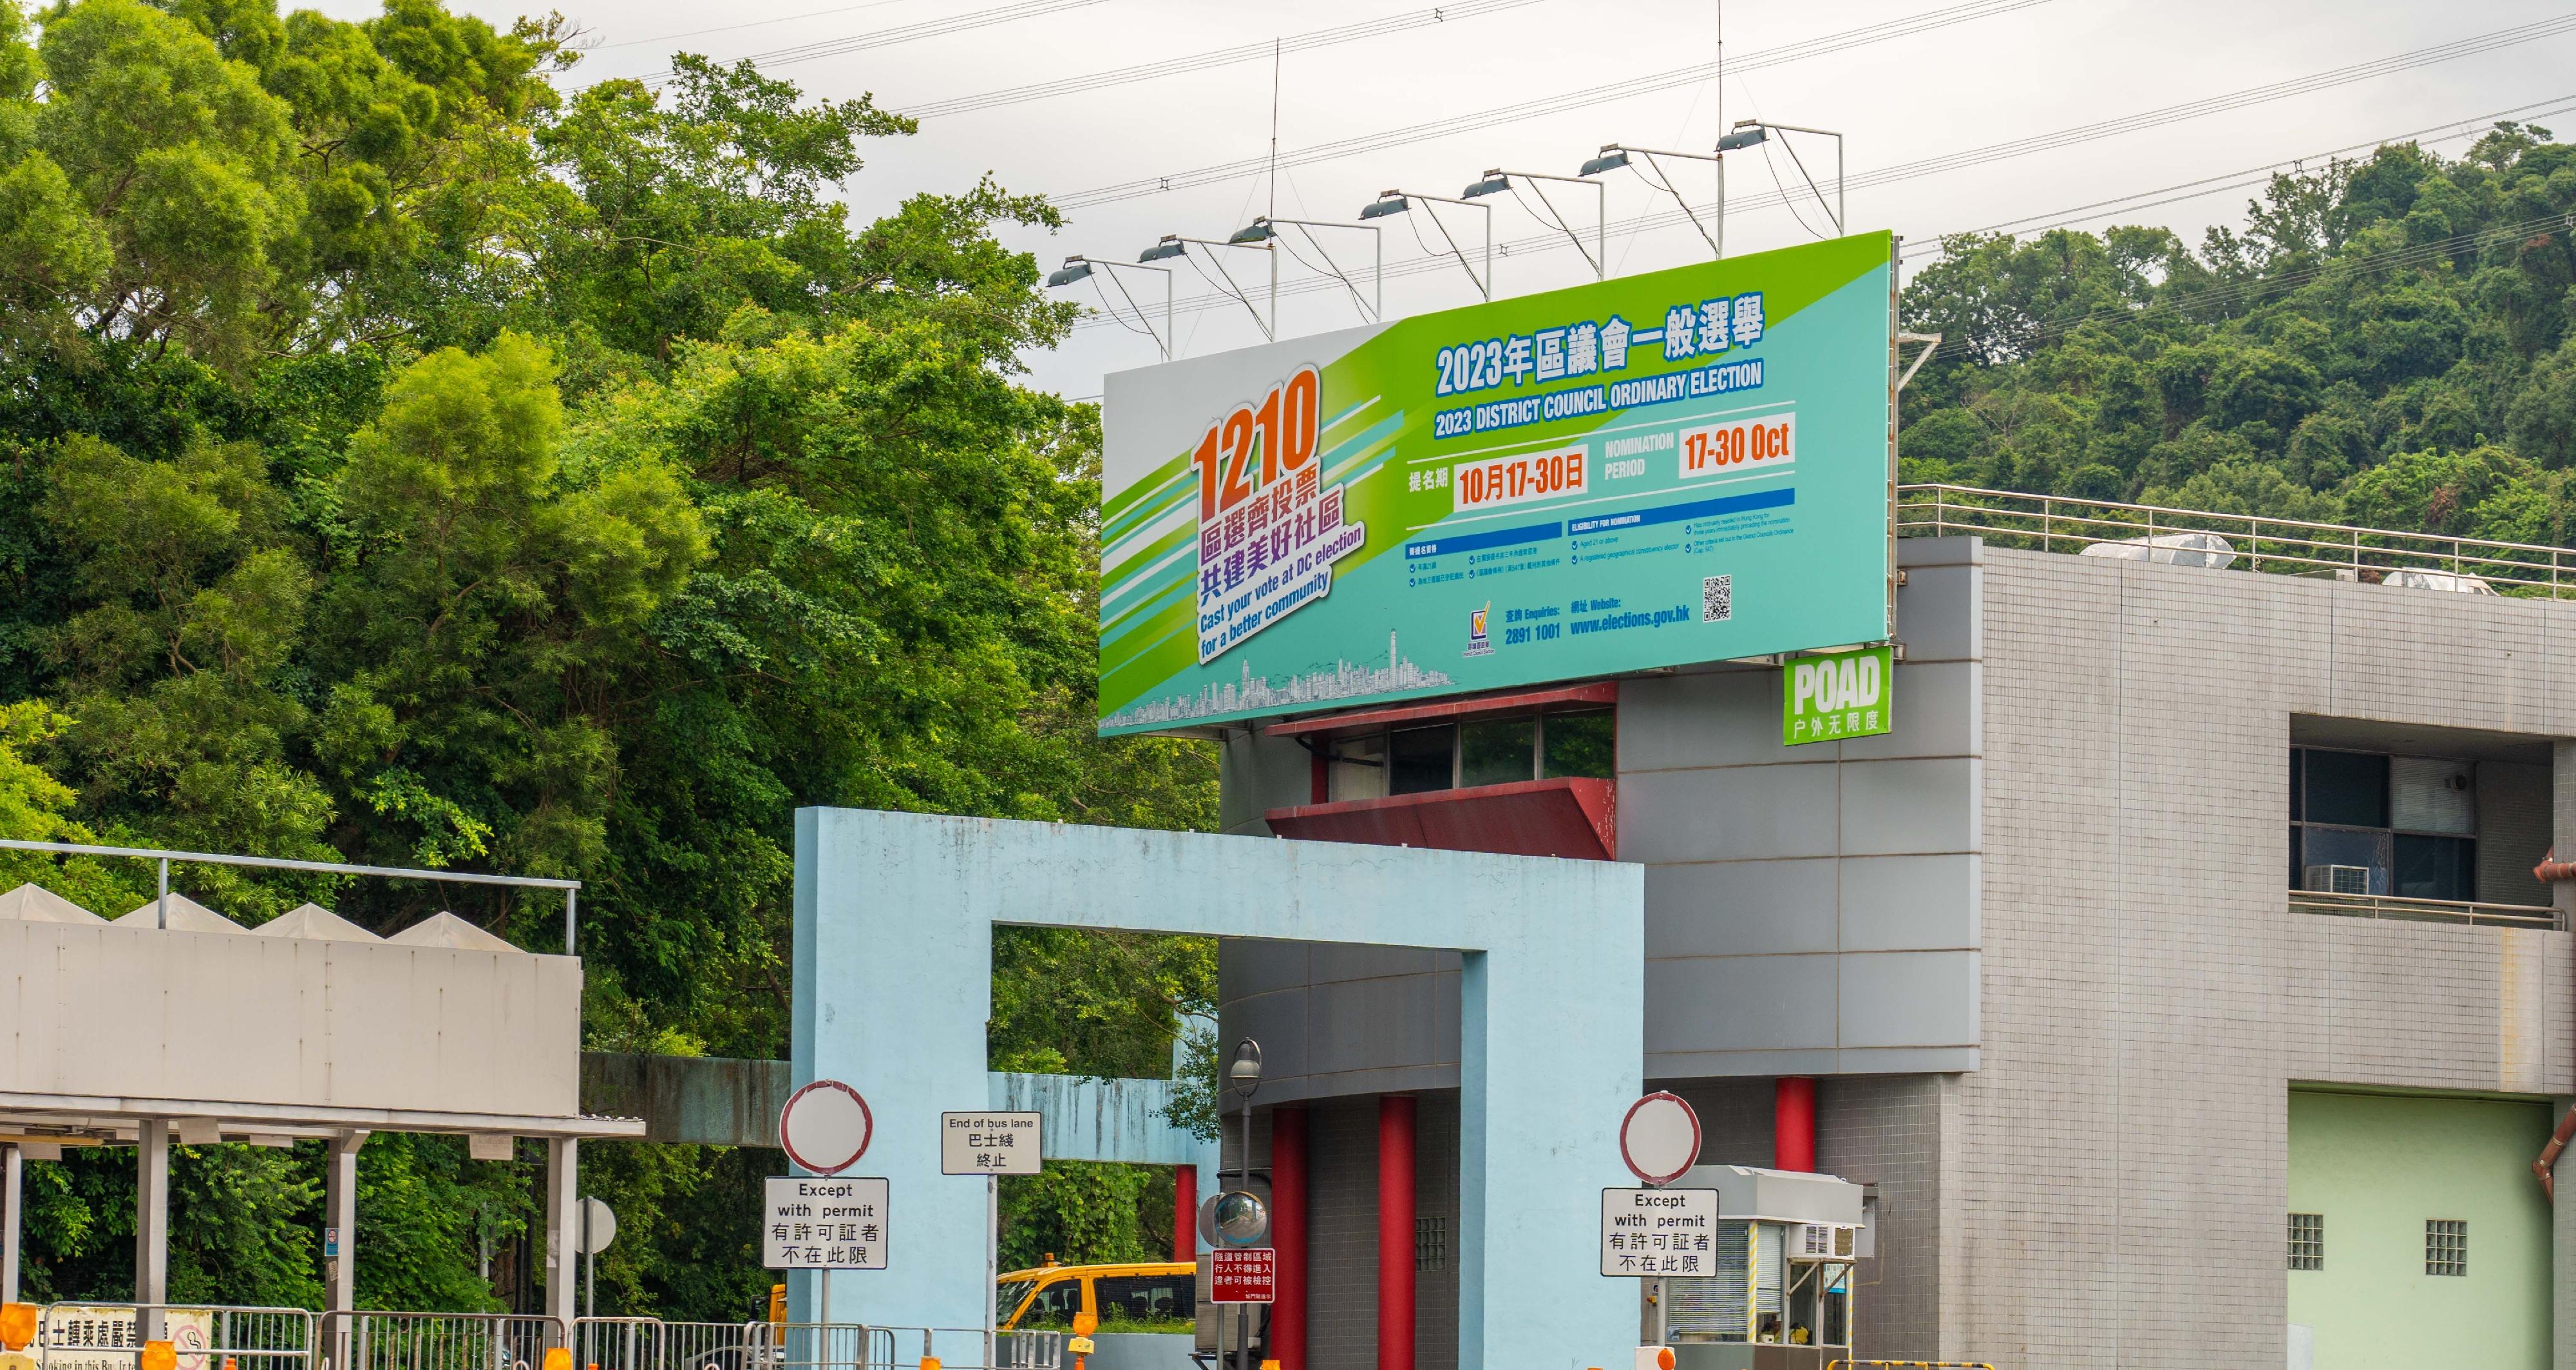 The 2023 District Council Ordinary Election will be held on December 10 (Sunday). The nomination period for the election started on October 17, and will continue until October 30. The Government has launched a publicity campaign for the nomination period that includes displays of giant banners in different districts.